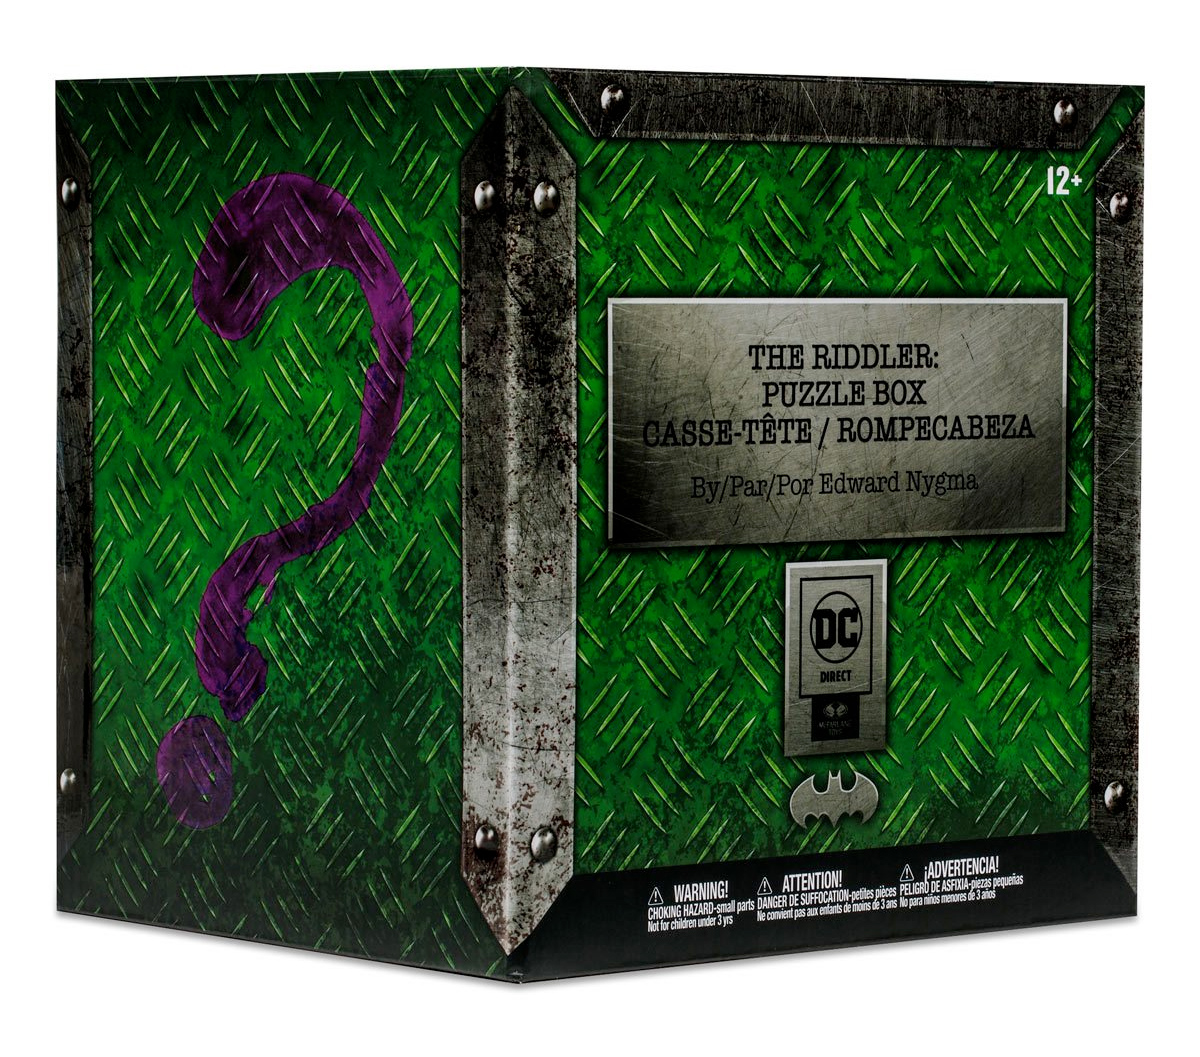 The Riddler Puzzle Box by Edward Nygma Replica